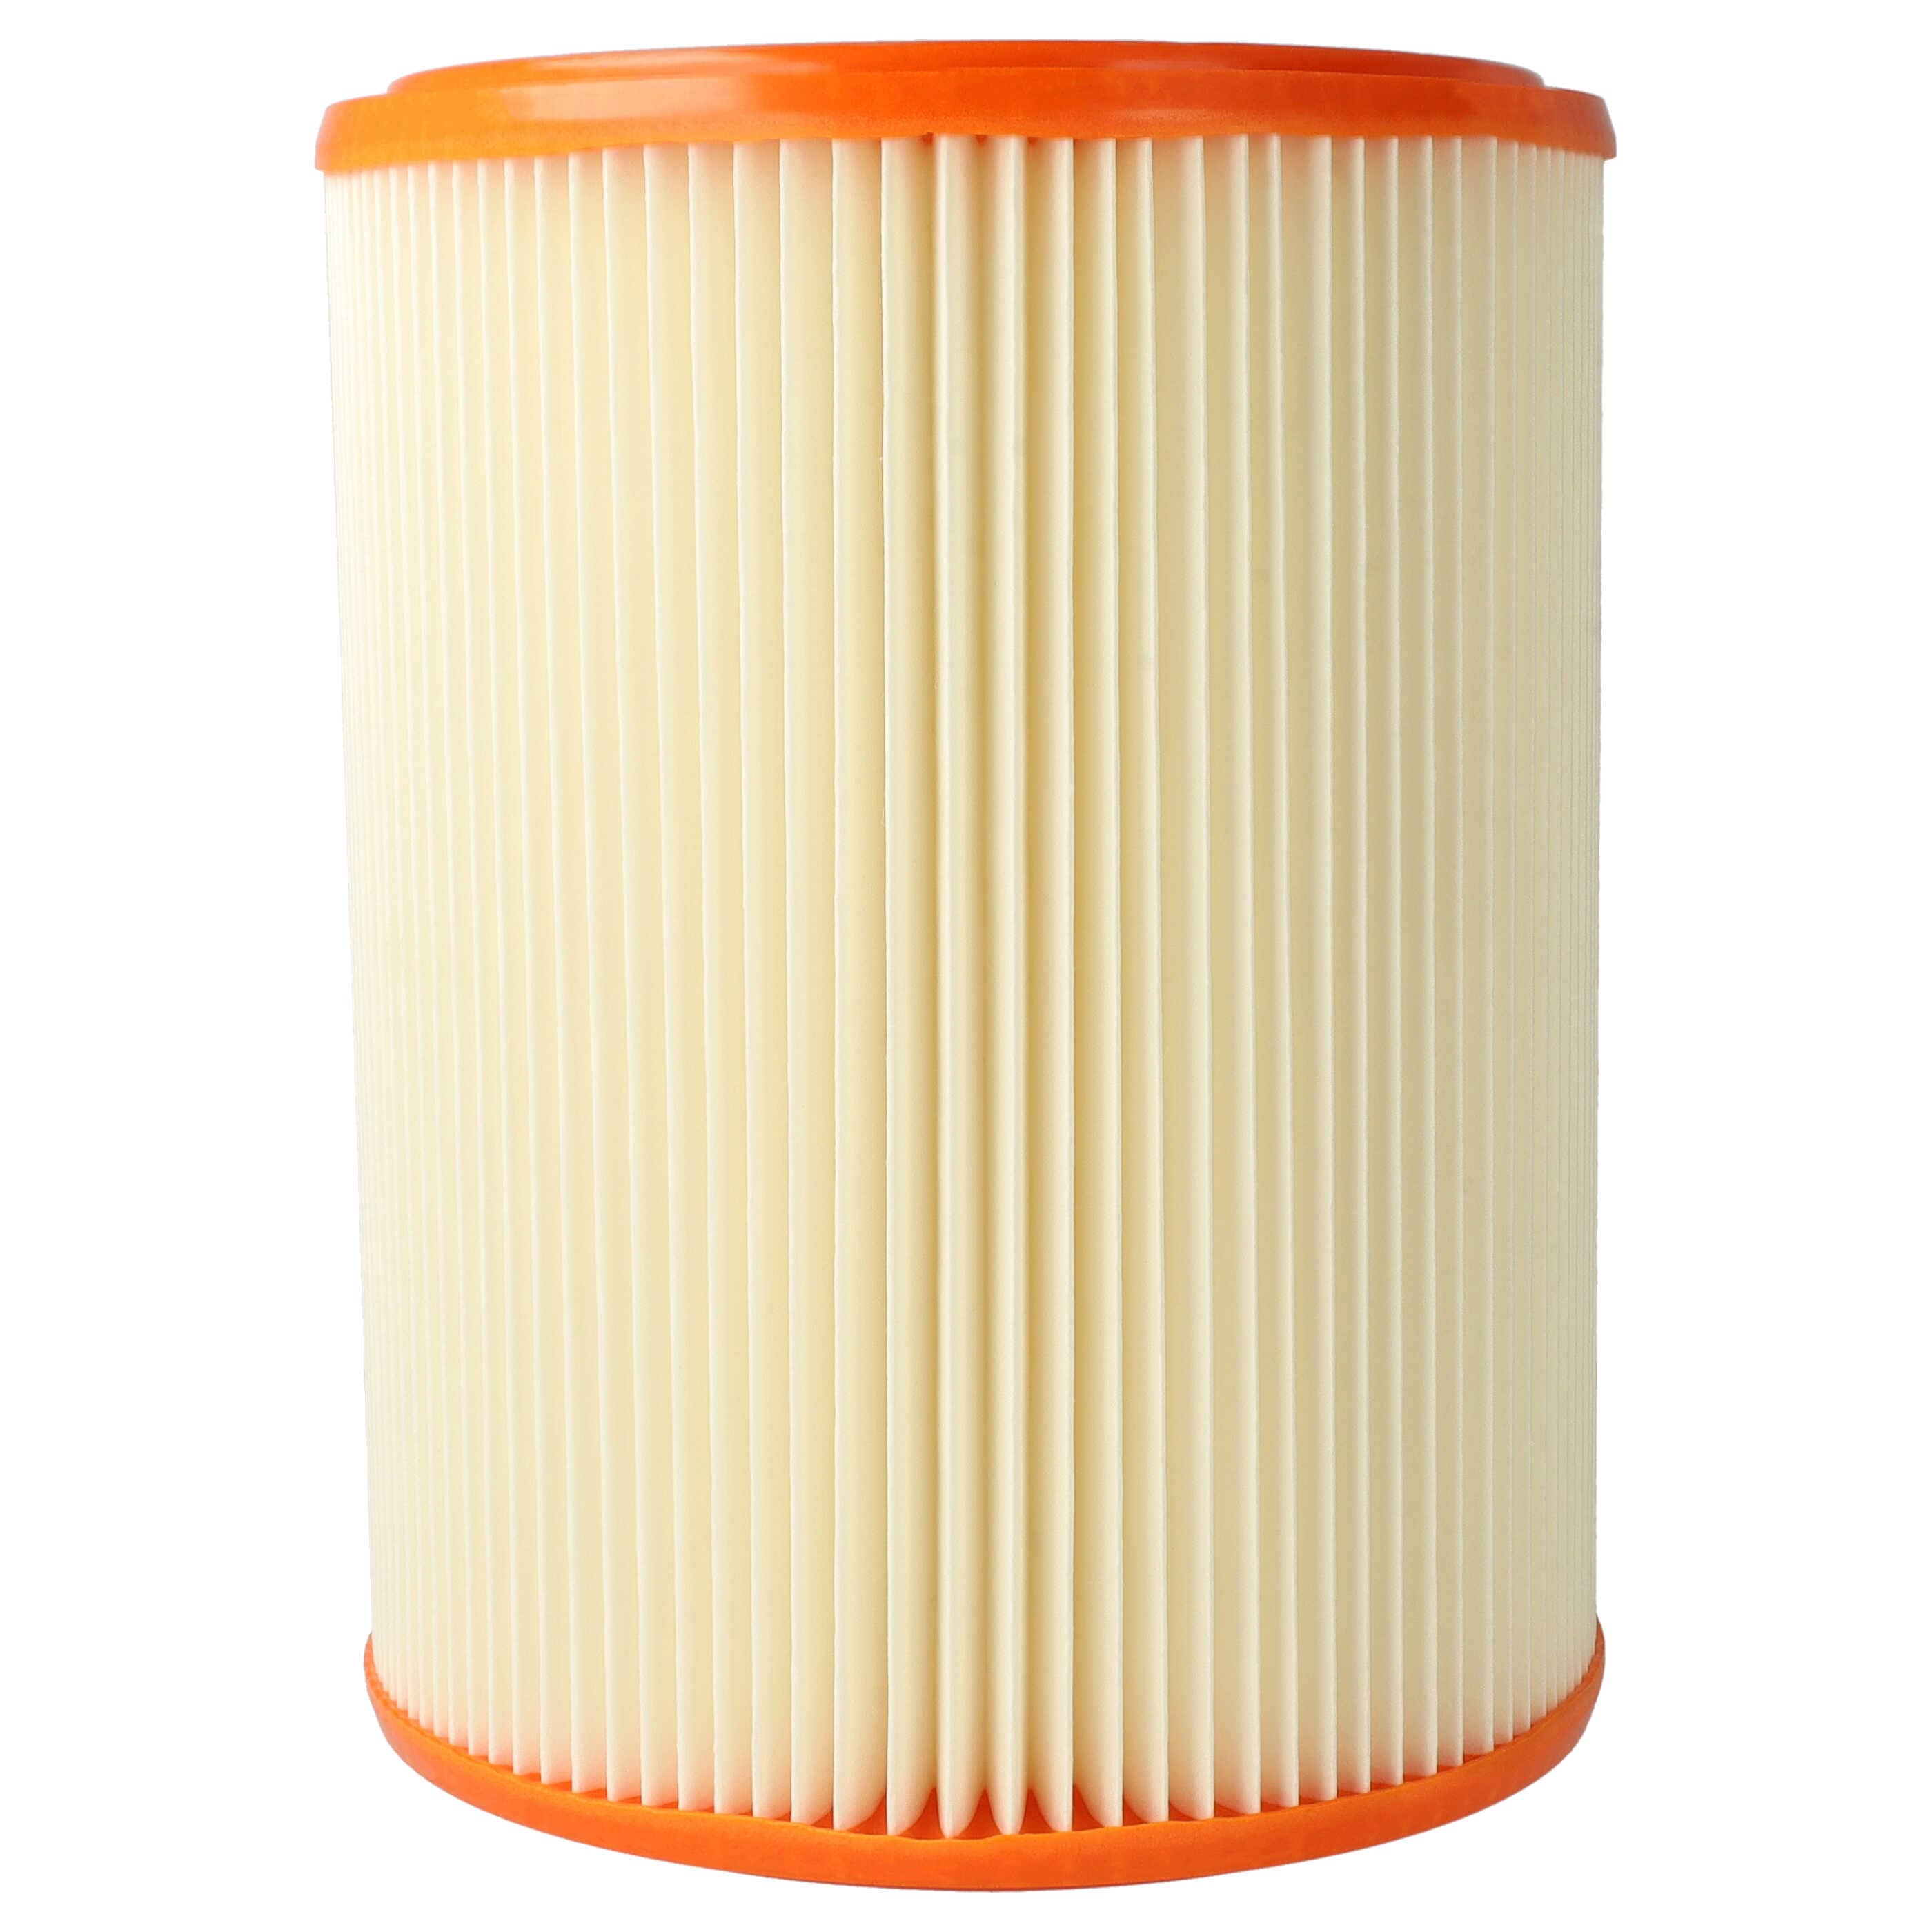 1x pleated filter replaces Festool 486241 for Bosch Vacuum Cleaner